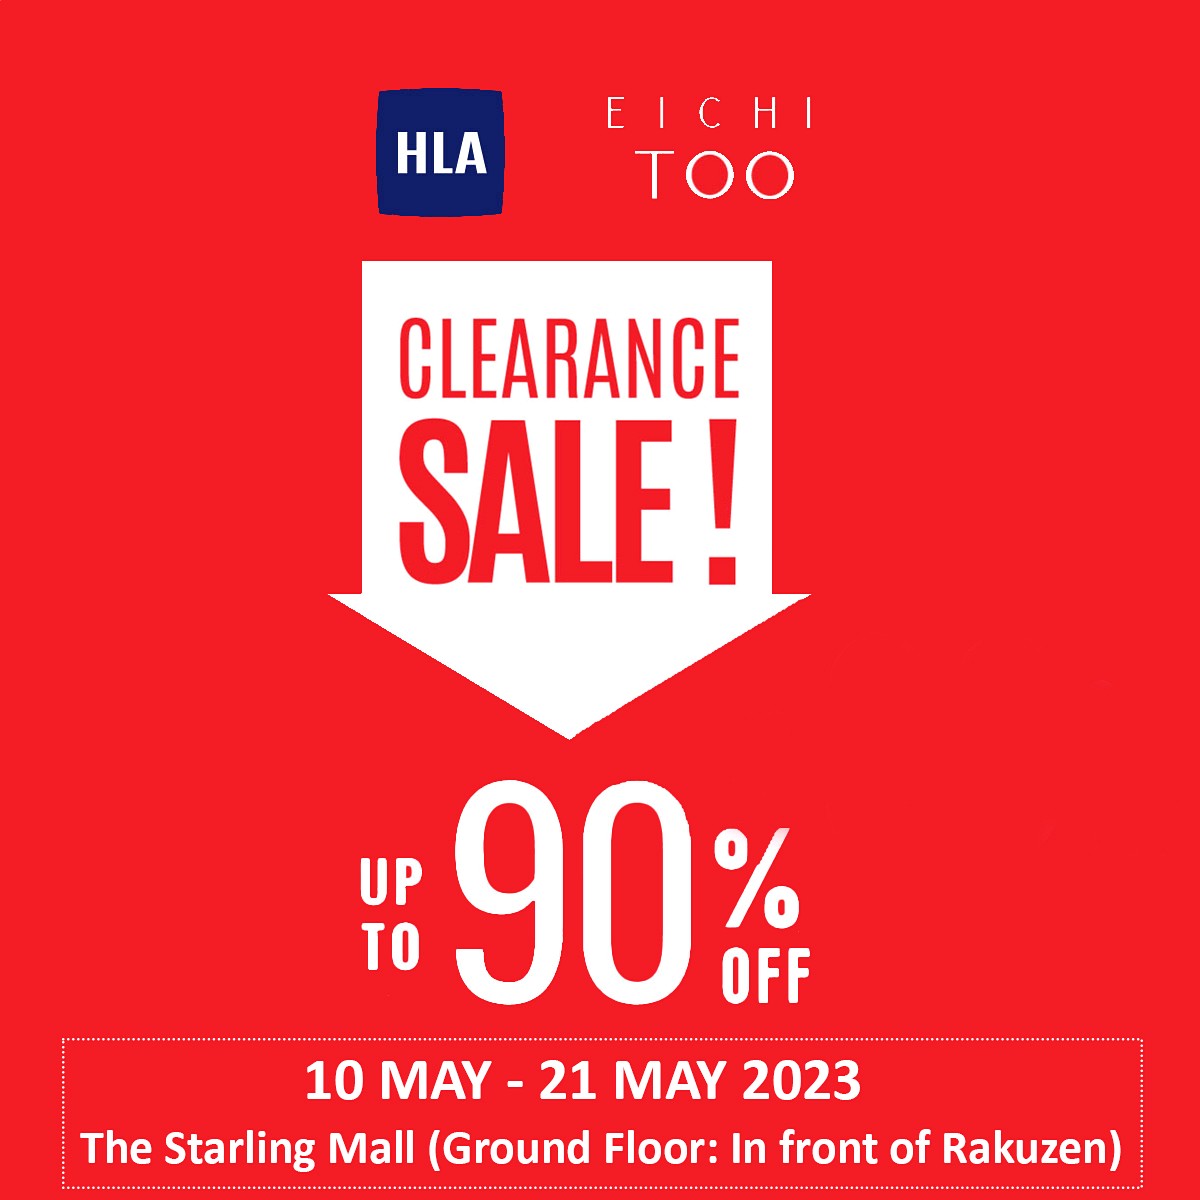 booth-clearance-sale-May-2023-final-jpg-1-1 - Apparels Fashion Accessories Fashion Lifestyle & Department Store Kuala Lumpur Selangor Warehouse Sale & Clearance in Malaysia 